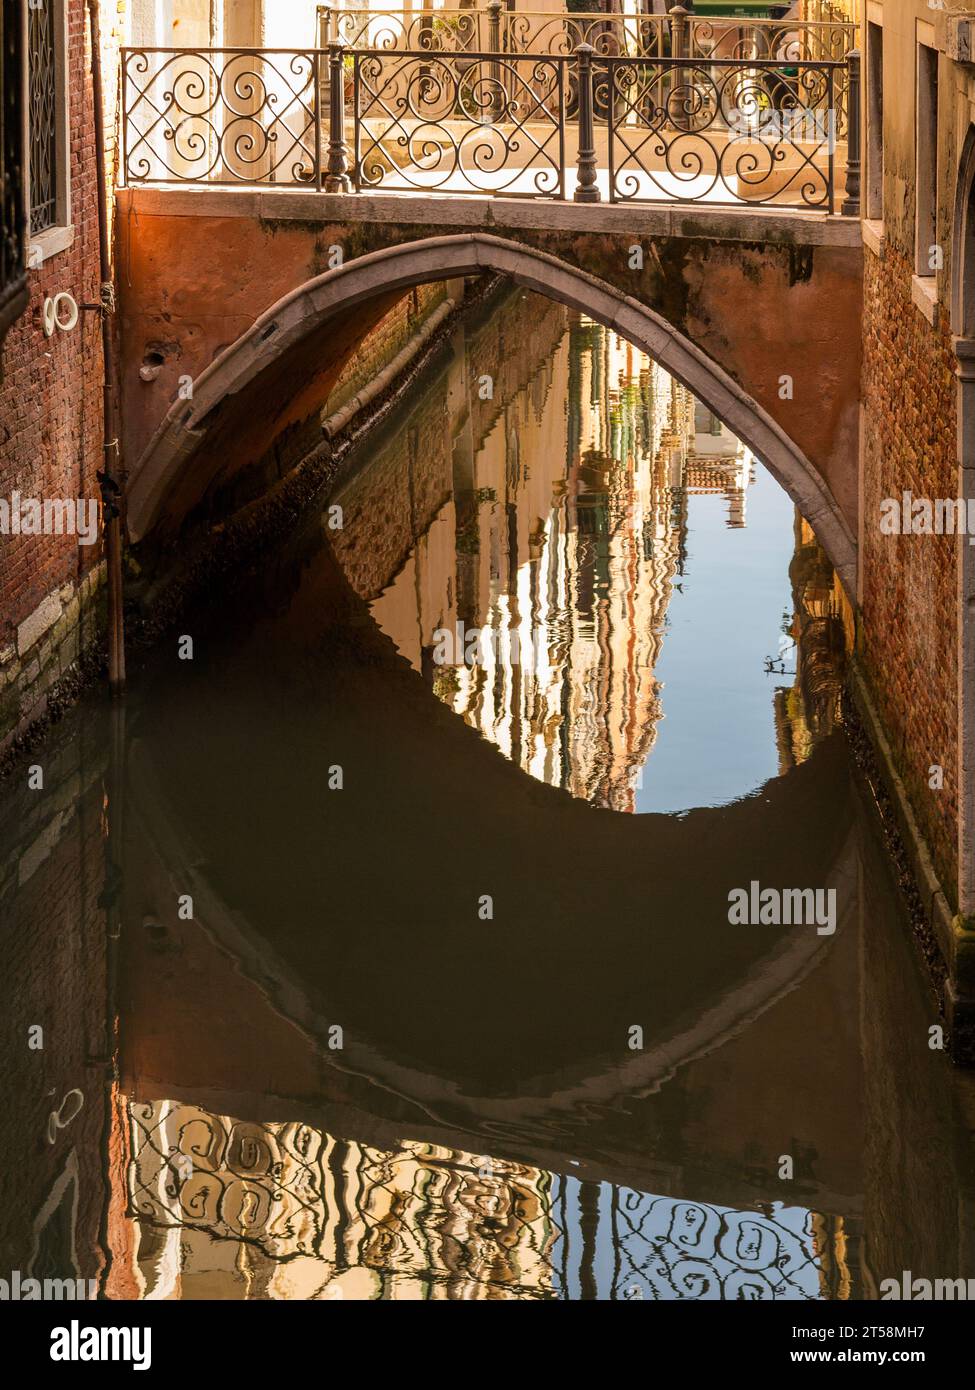 A bridge in Venice, Italy is reflected in the water of a canal. The bridge barriers are decorated with geometric patterns in wrought iron. The reflect Stock Photo